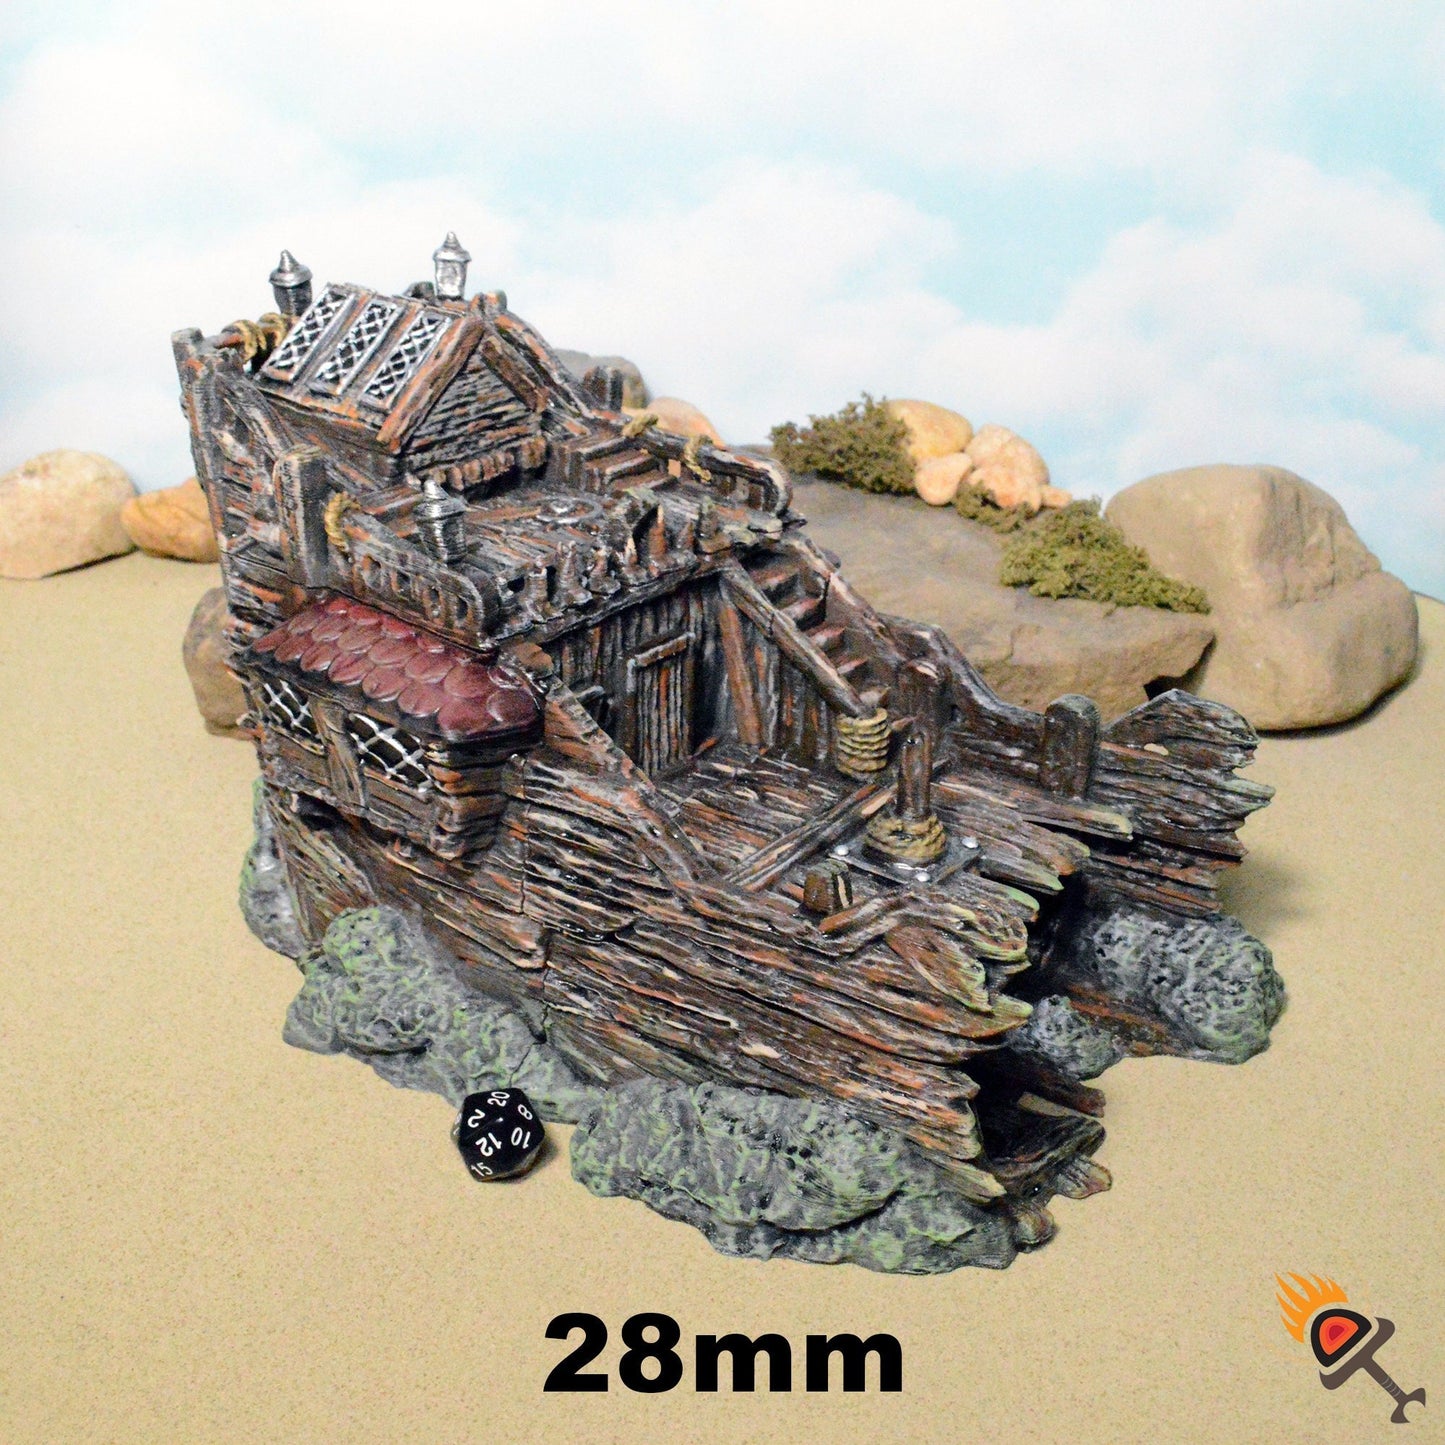 Huge Shipwreck 15mm 28mm 32mm for D&D Terrain, DnD Pathfinder Pirate Coastal Ruins, Depths of Savage Atoll